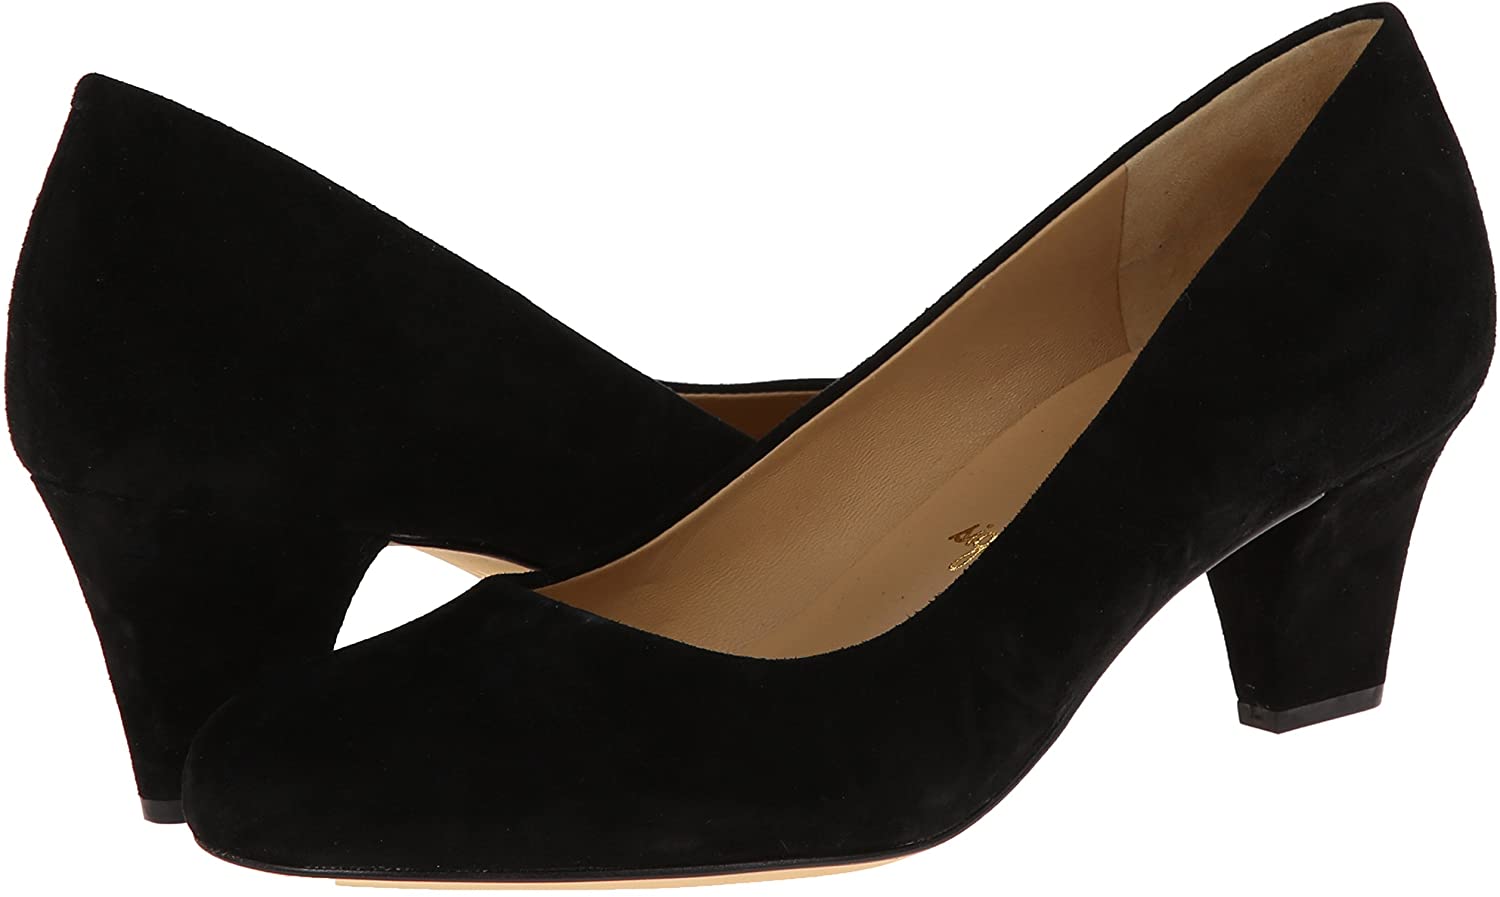 Trotters Womens Penelope Closed Toe Classic Pumps, Black Suede, Size 7. ...